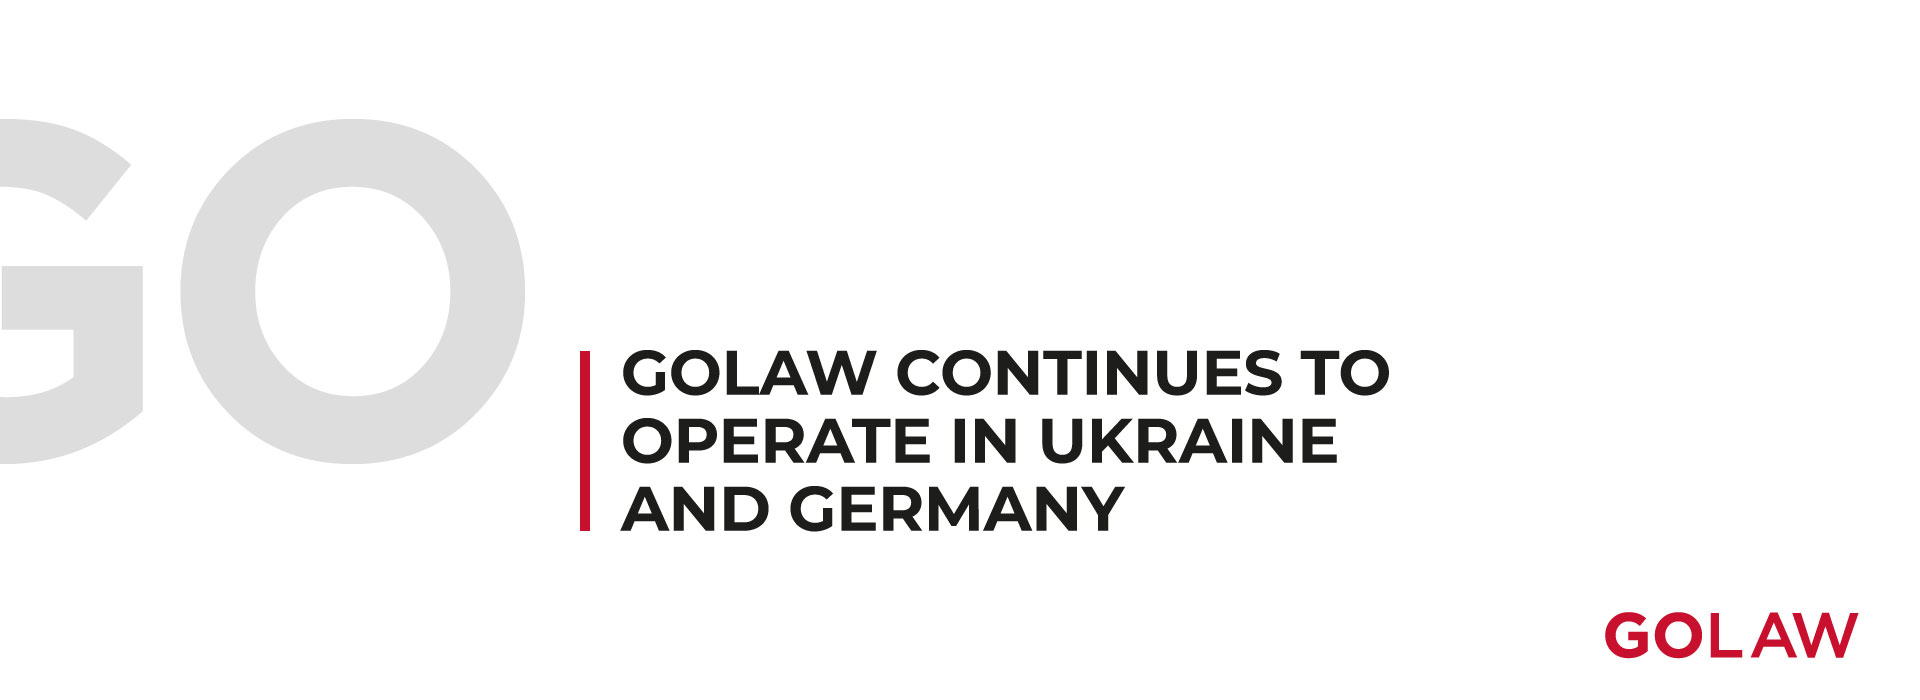 GOLAW Continues to Operate and Implement Clients’ Projects in Ukraine and Germany